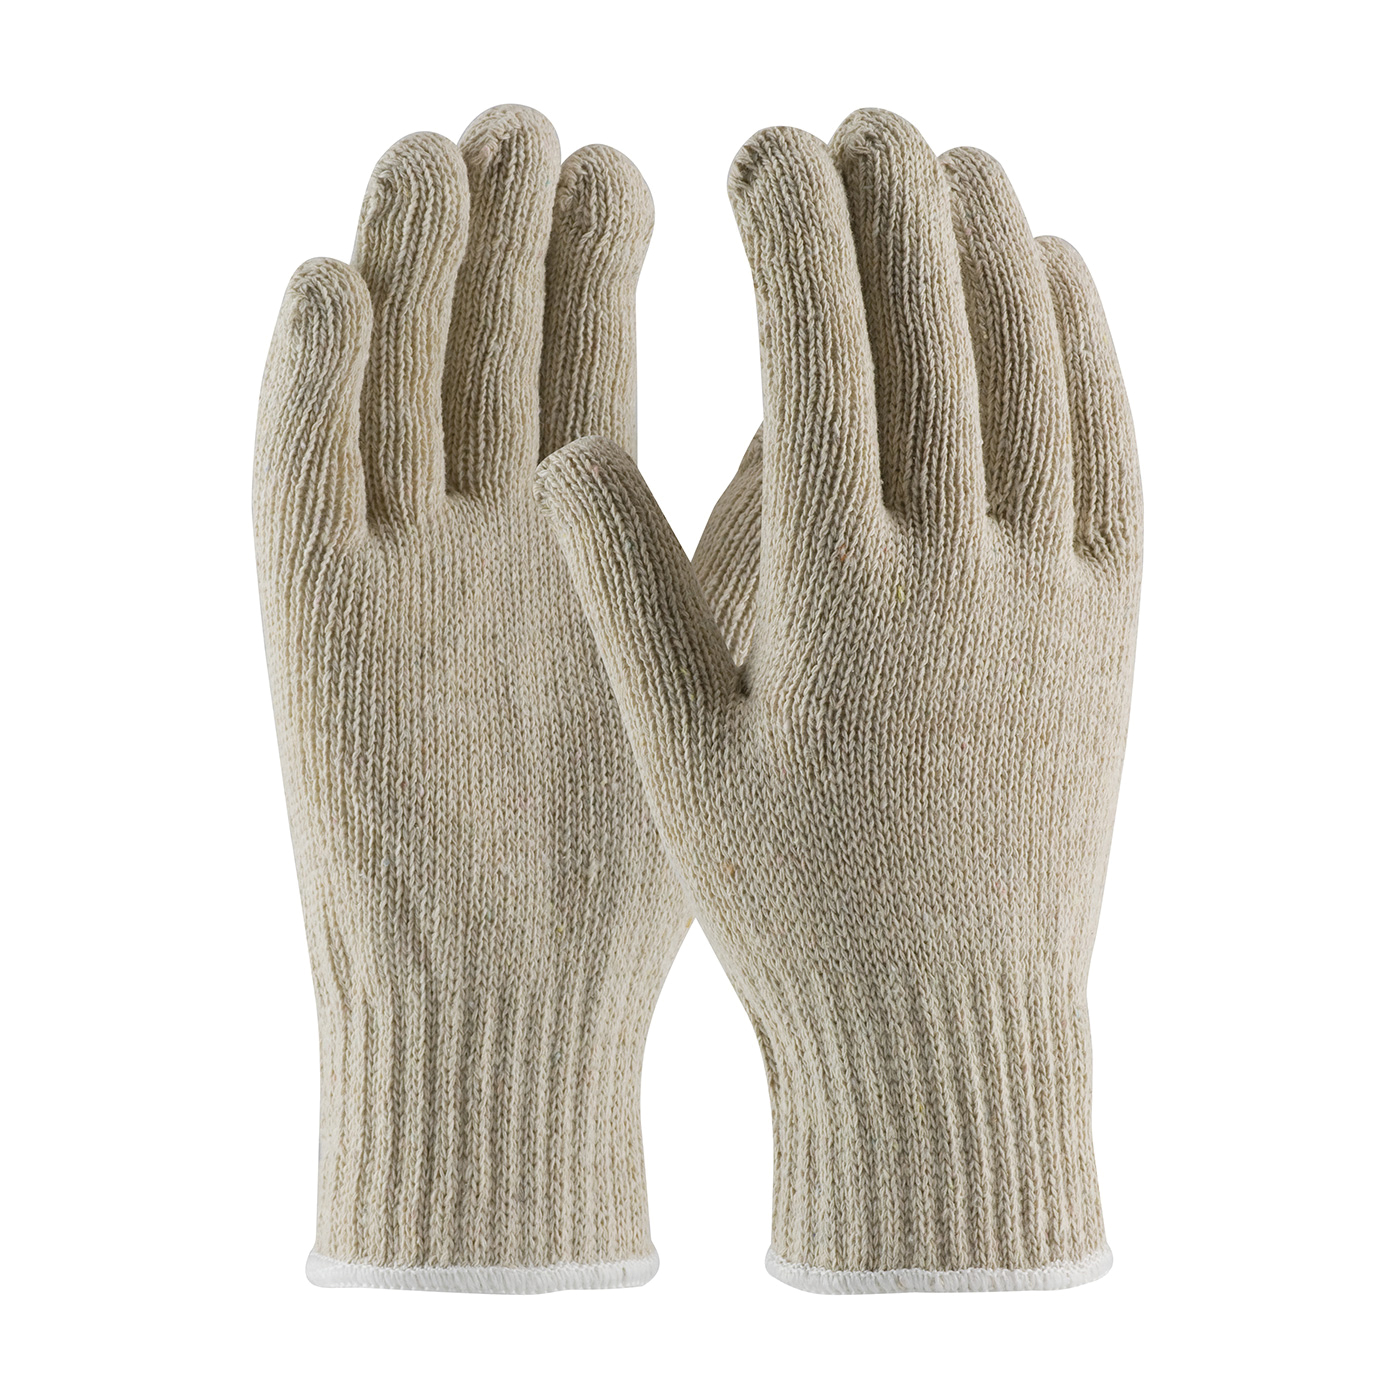 PIP® 35-C410/S 35-C410 Heavyweight General Purpose Gloves, Seamless Style, S, Cotton/Polyester Palm, 7 ga 65% Cotton/35% Polyester, Natural, Continuous Knit Wrist Cuff, Uncoated Coating, Cotton/Polyester Lining